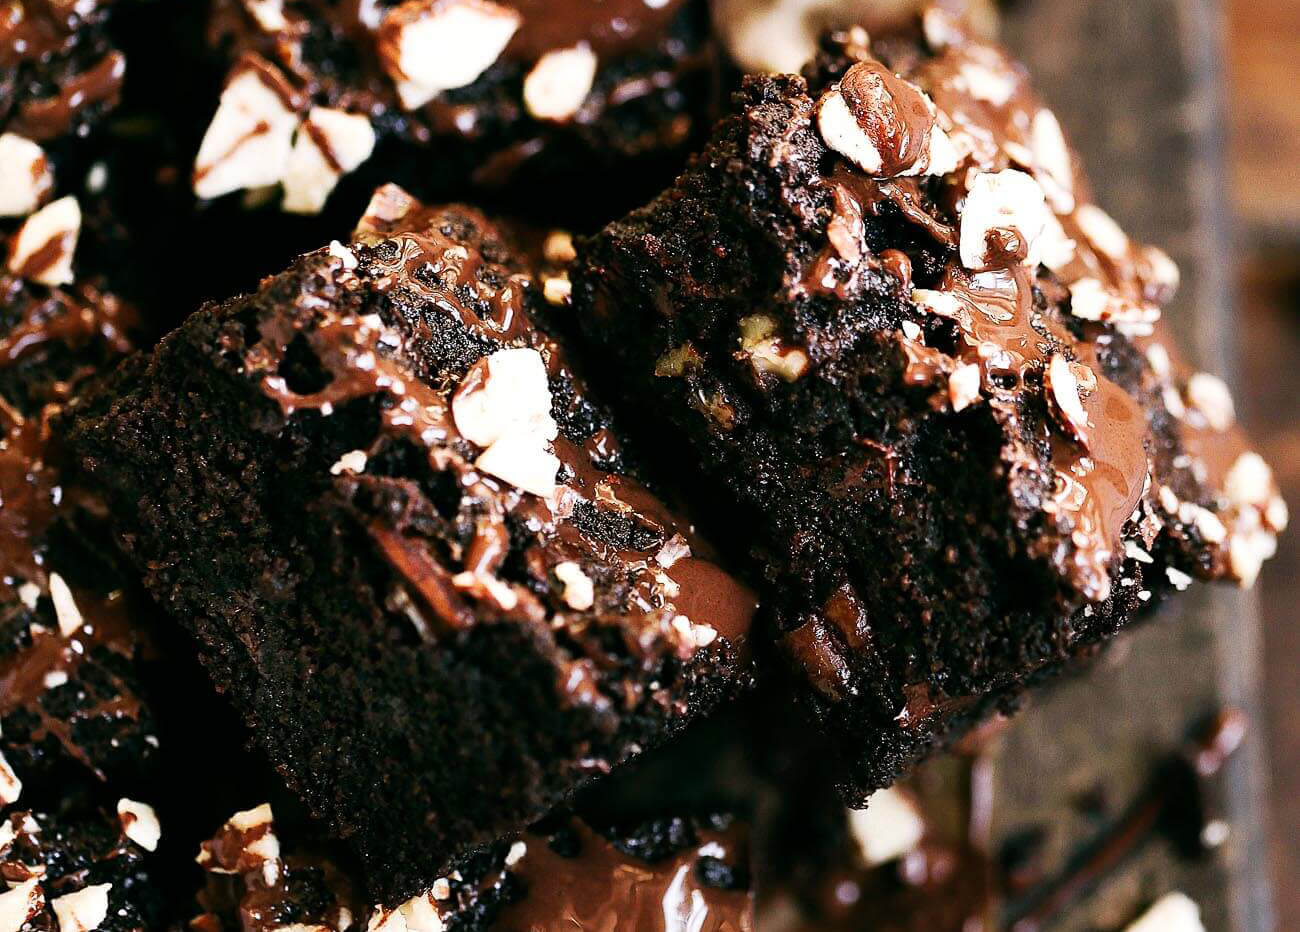 A must make decadent triple fudge coconut flour brownie recipe! Paleo and a healthy treat for everyone! Gluten eaters and healthy eaters alike will devour these rich chocolaty treats. Packed with loads of chocolate and nuts, these brownies are ready for the oven in only five minutes! Best gluten free brownies. Best paleo brownies recipe. Fudgey paleo brownie recipe. Fudgey chocolate brownies. Healthy brownie recipe. Easy paleo brownies.